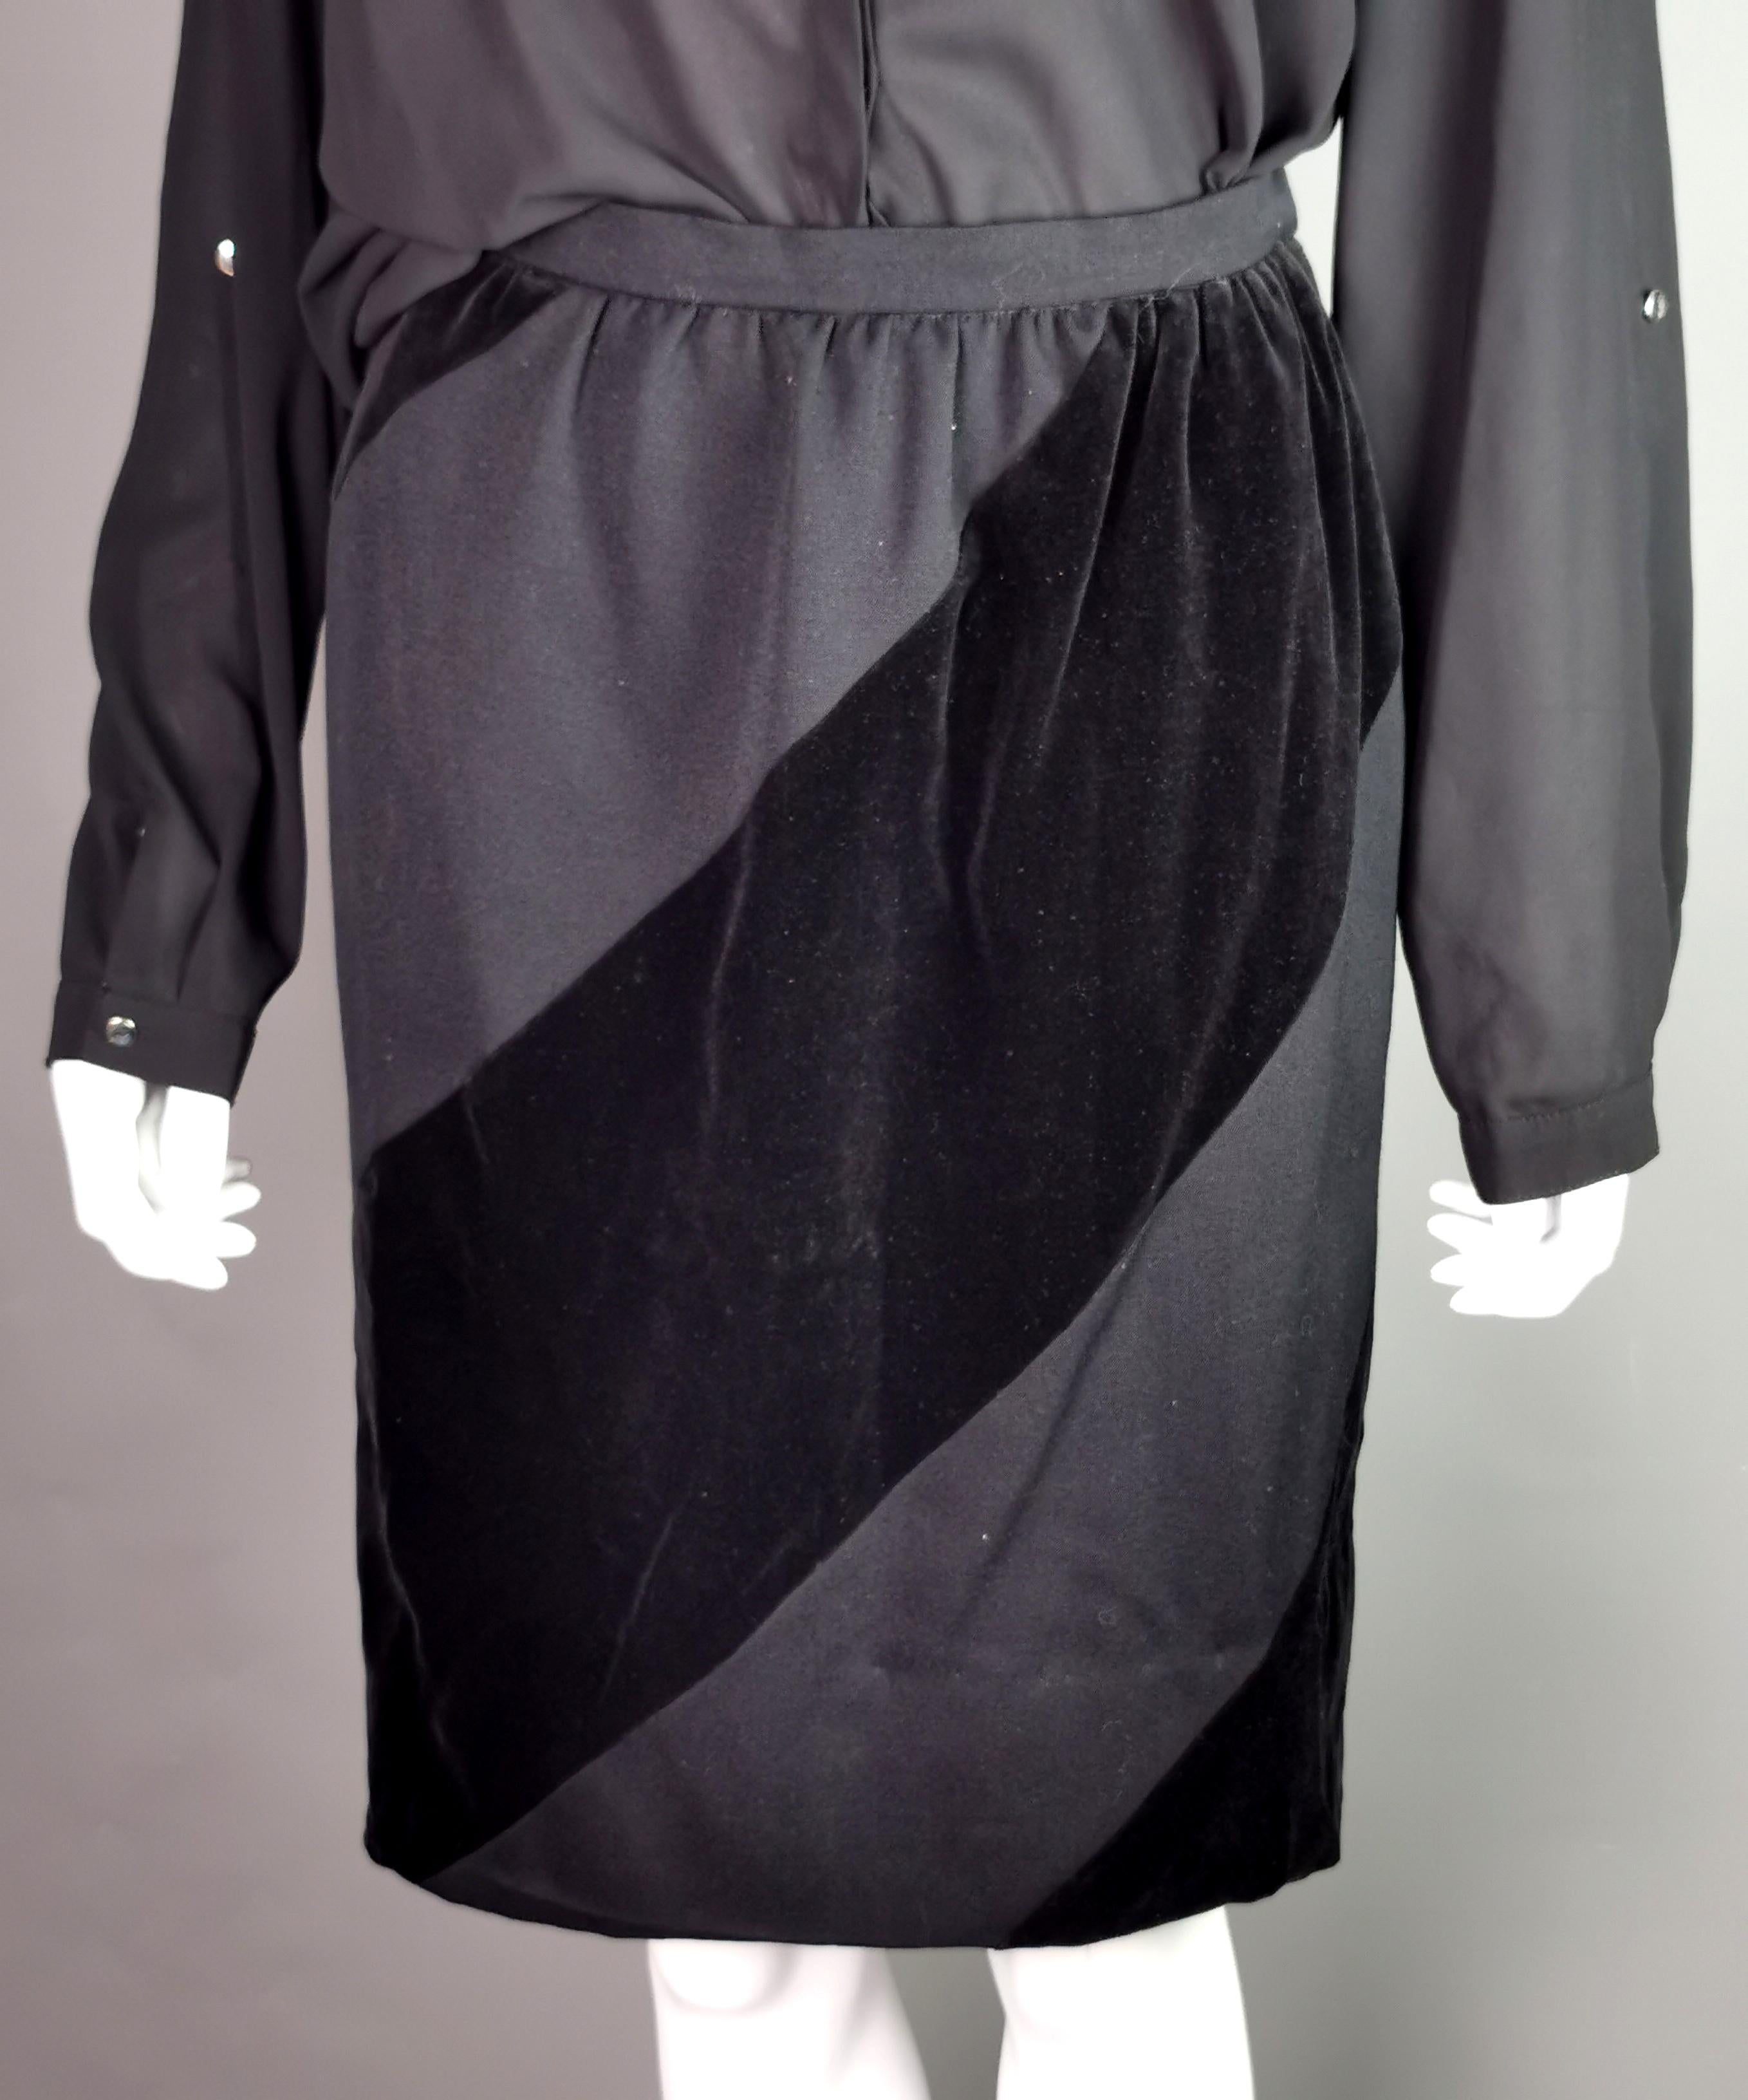 A stylish vintage Valentino boutique black velvet and wool skirt.

It is a knee length, pencil style skirt, could definitely work as a day to night piece.

It is made from black silk velvet and wool with the velvet running in diagonal patterns.

It